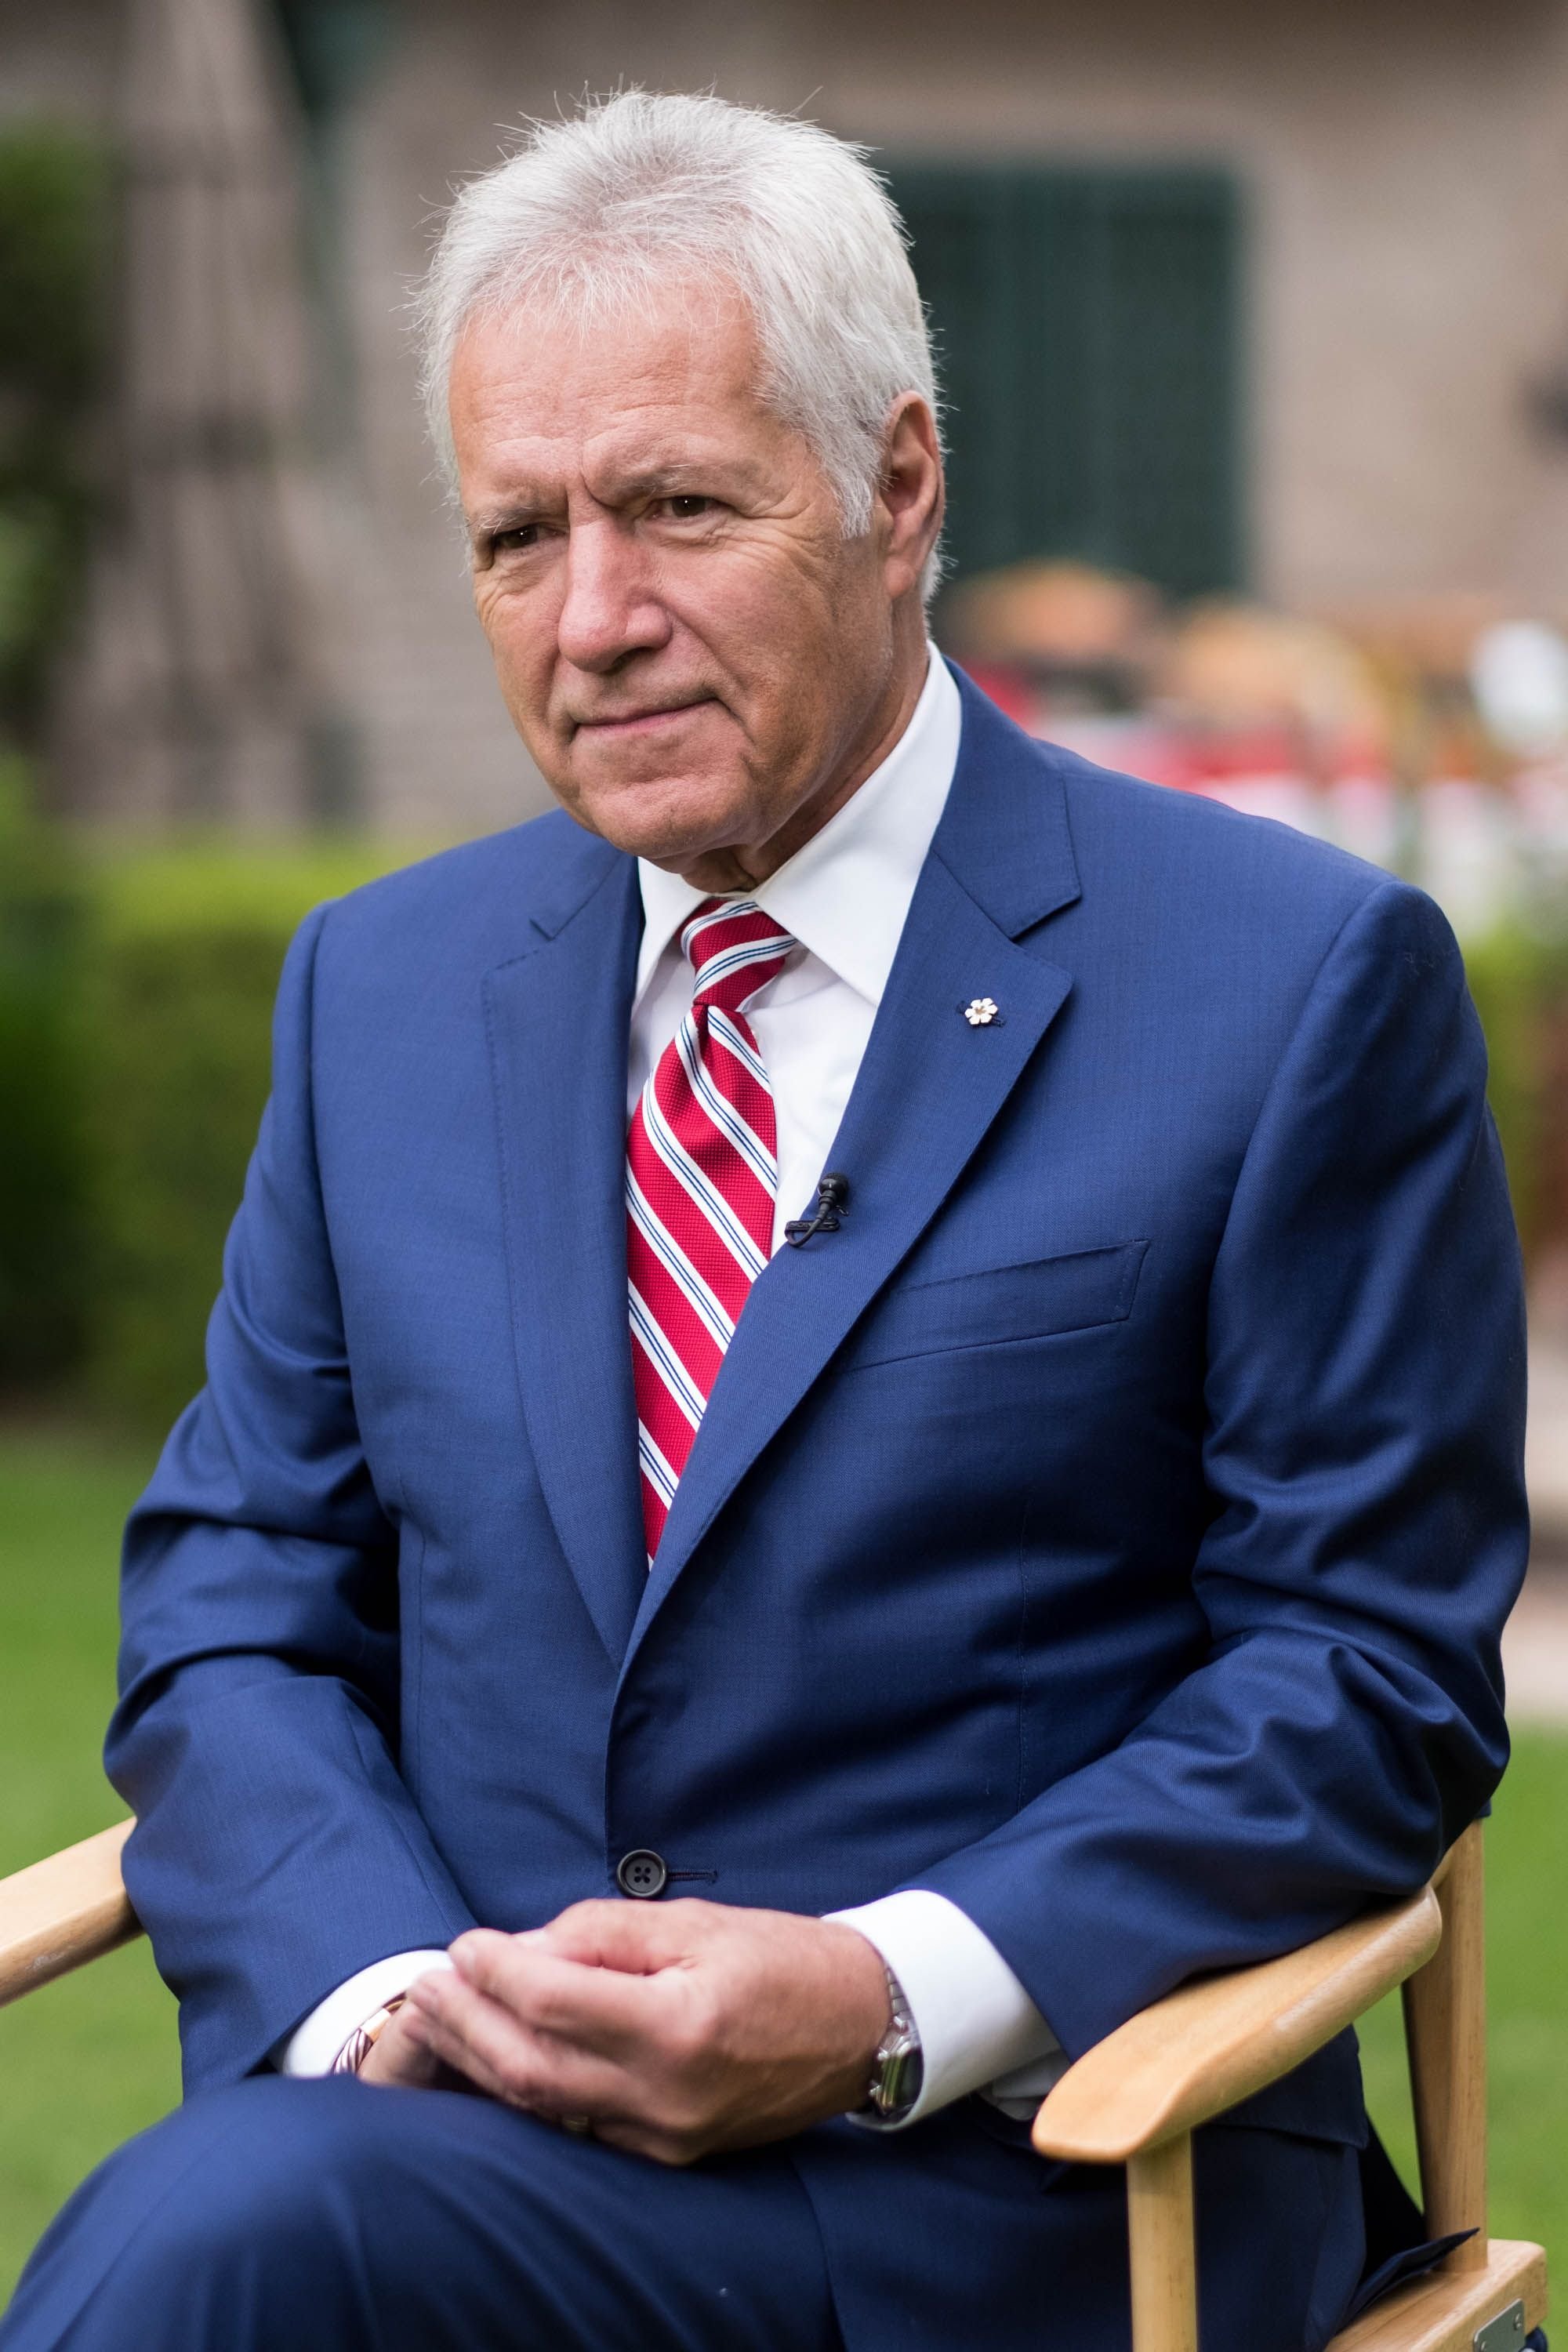 TV personality Alex Trebek at the 150th anniversary of Canada's Confederation at the Official Residence of Canada on June 30, 2017 | Photo: Getty Images